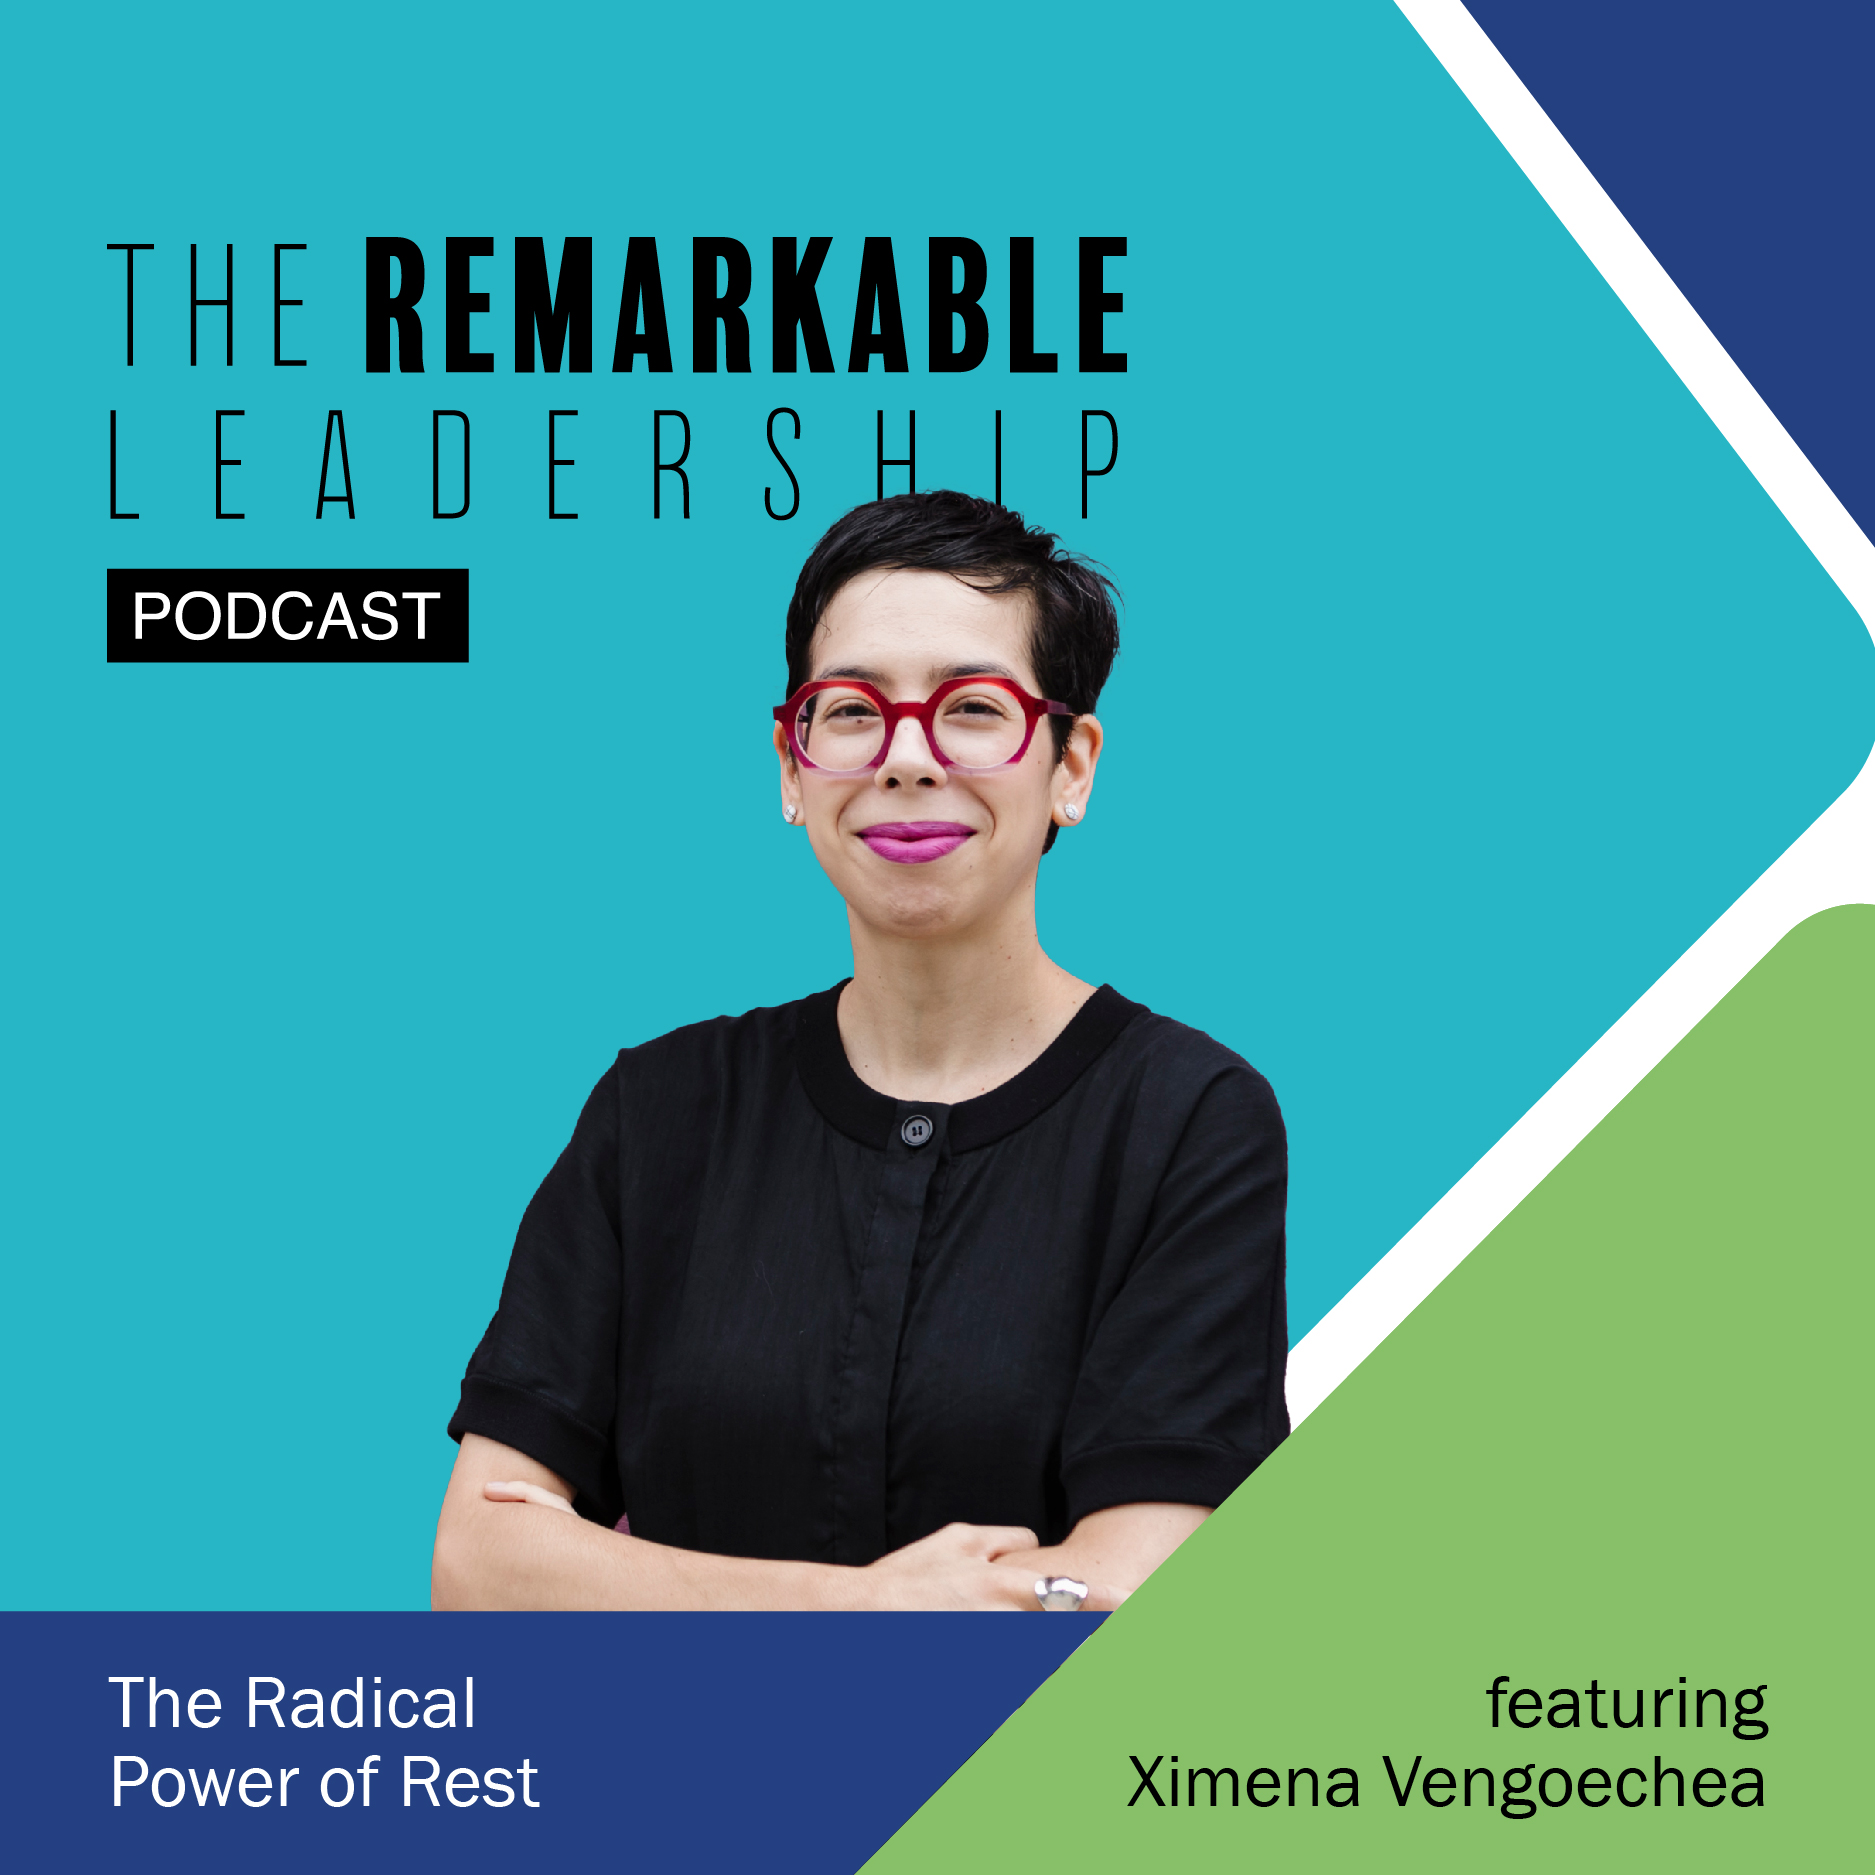 The Radical Power of Rest with Ximena Vengoechea